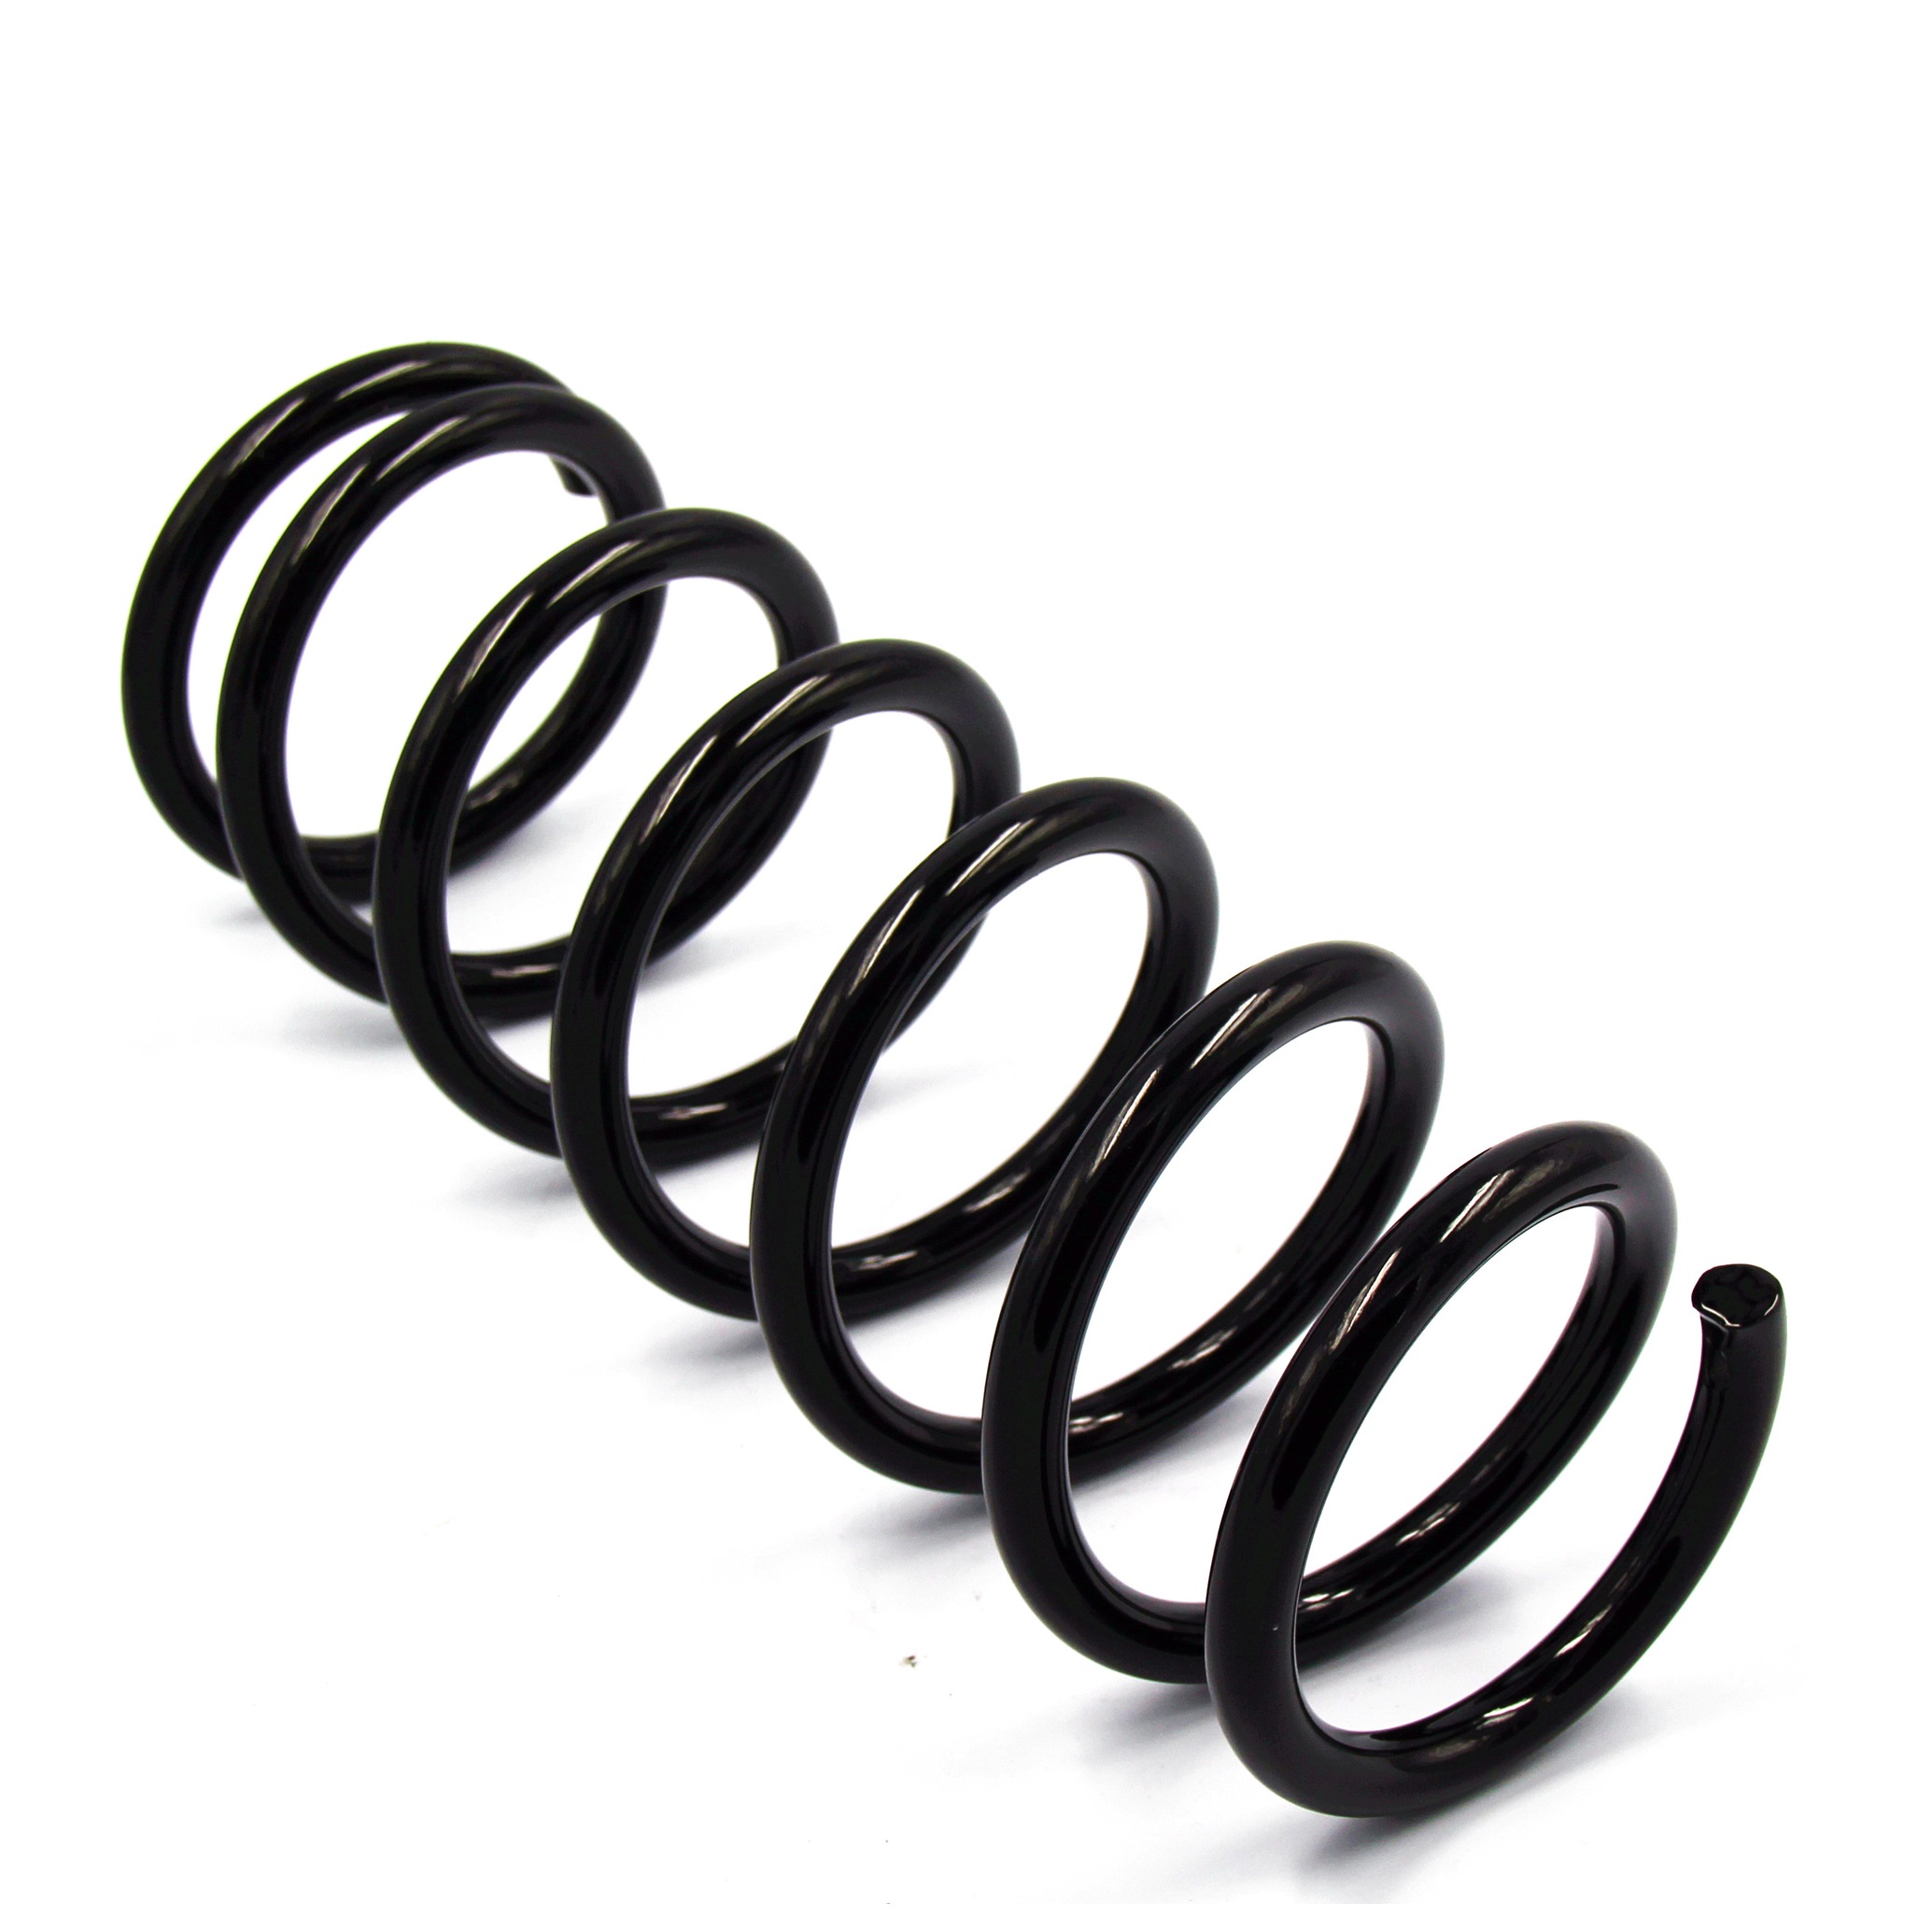 SUSPENSION SPRING for TOYOTA CROWN